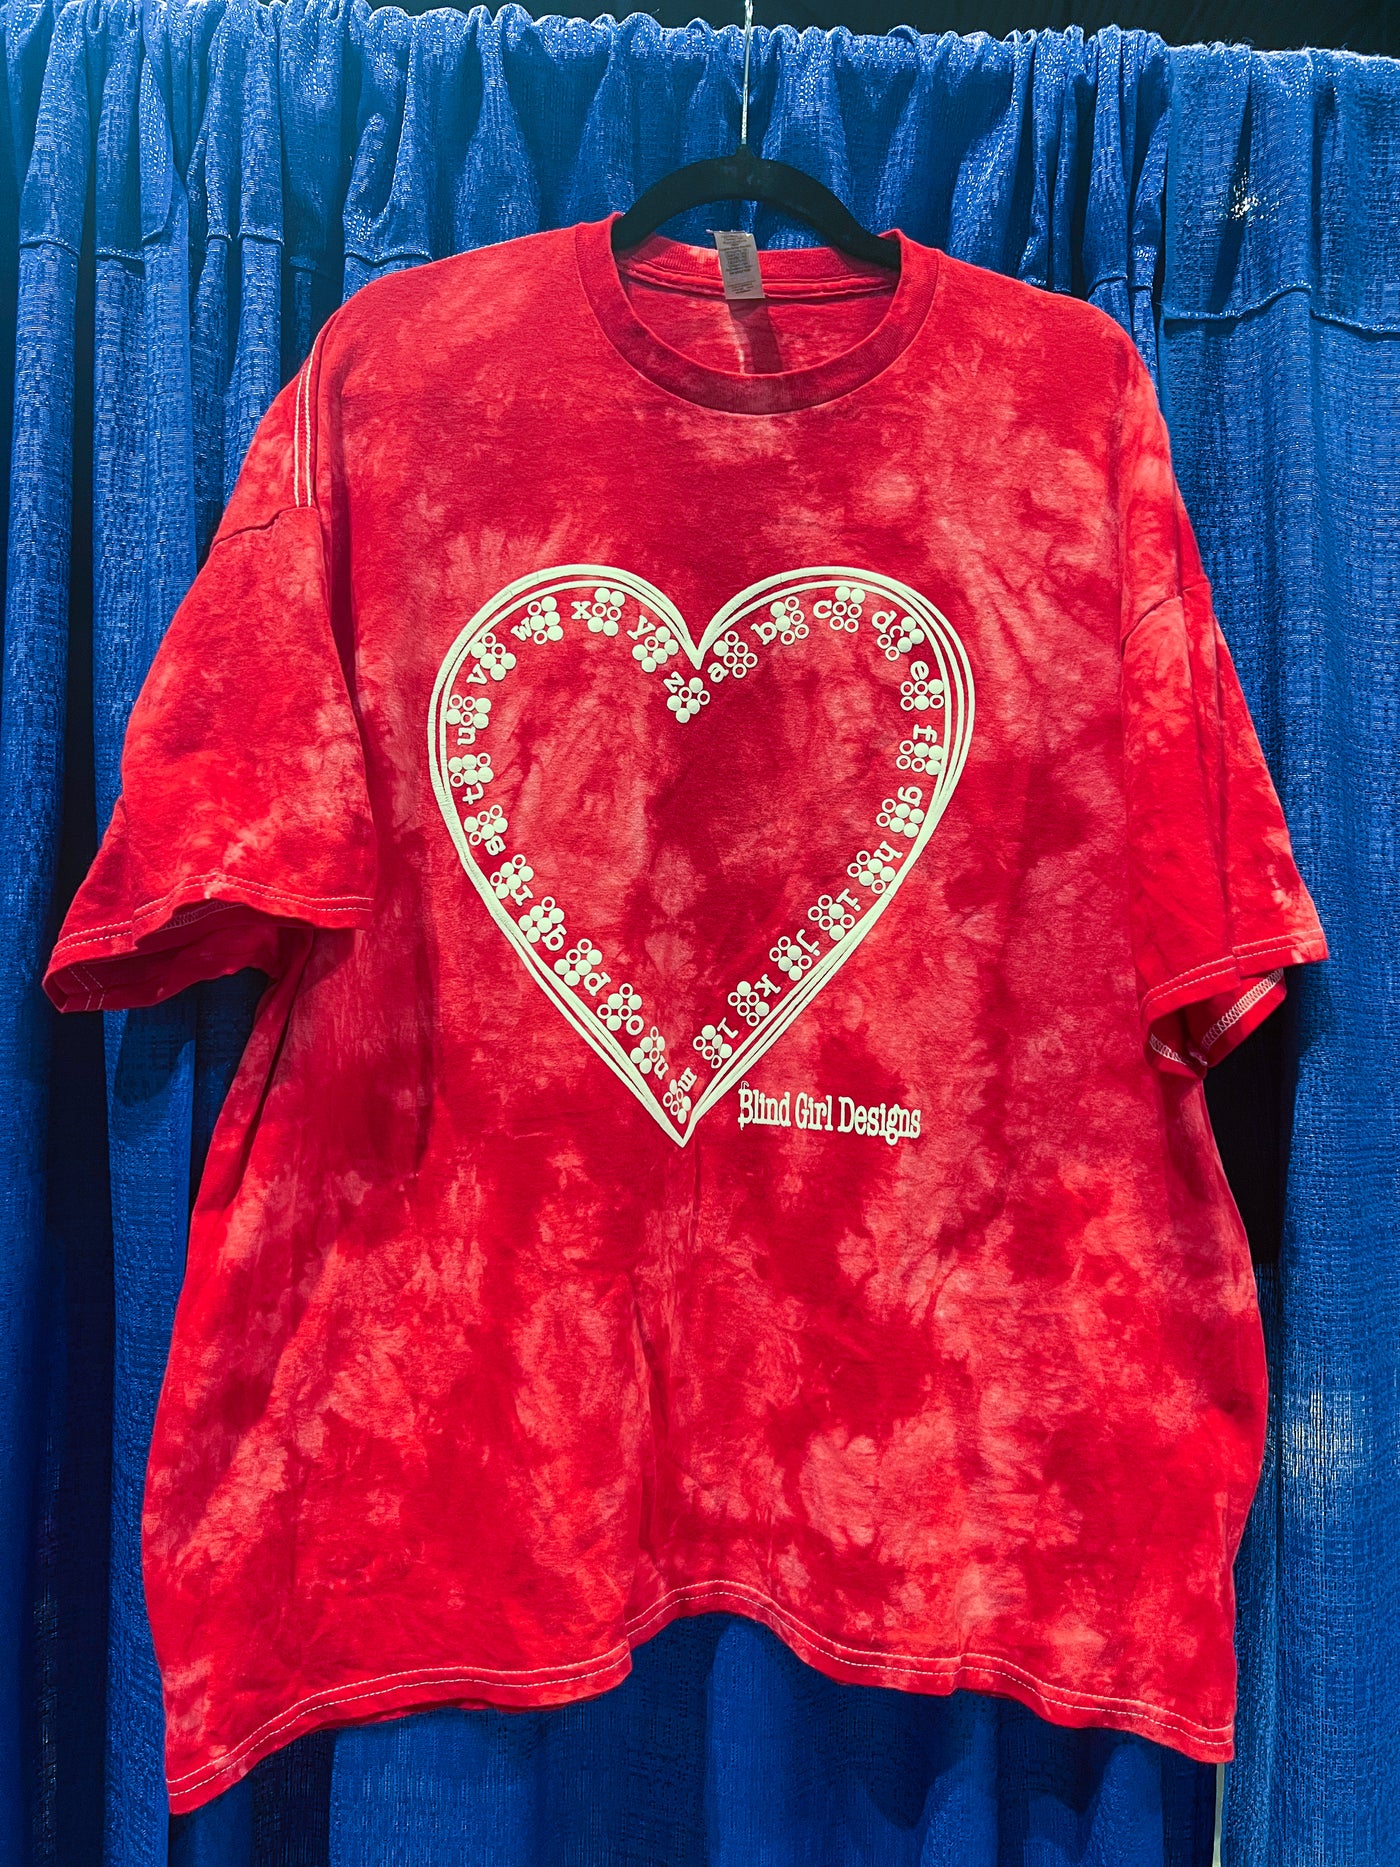 This dark and light red tie-dye shirt features the Braille ABCs lining the inside of a hand-drawn heart. It's printed in our puff ink so that it is tactile! It’s delightful.